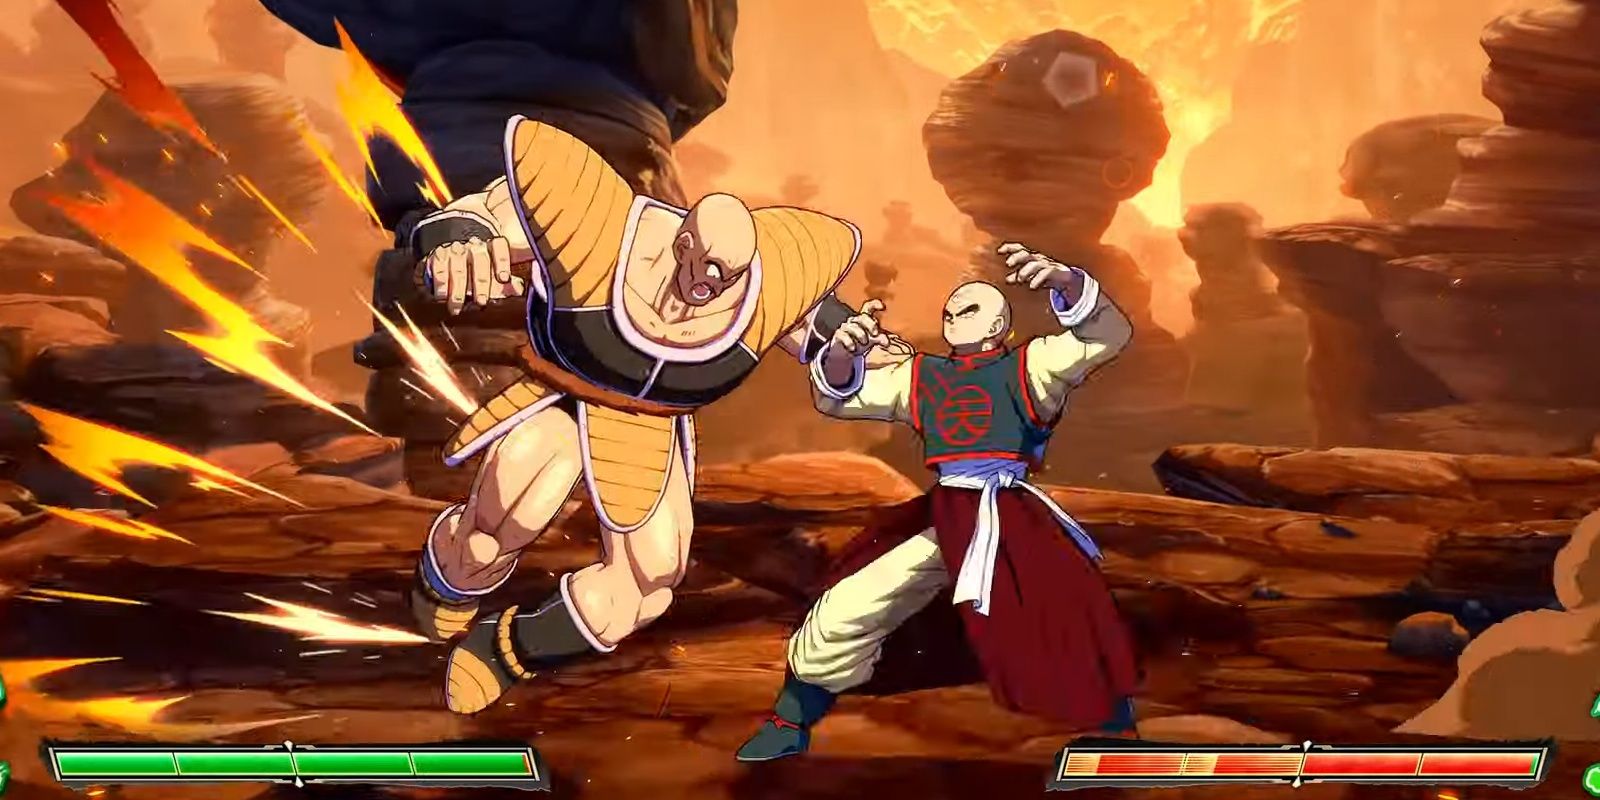 Ten colliding with Nappa in Dragon Ball FighterZ.